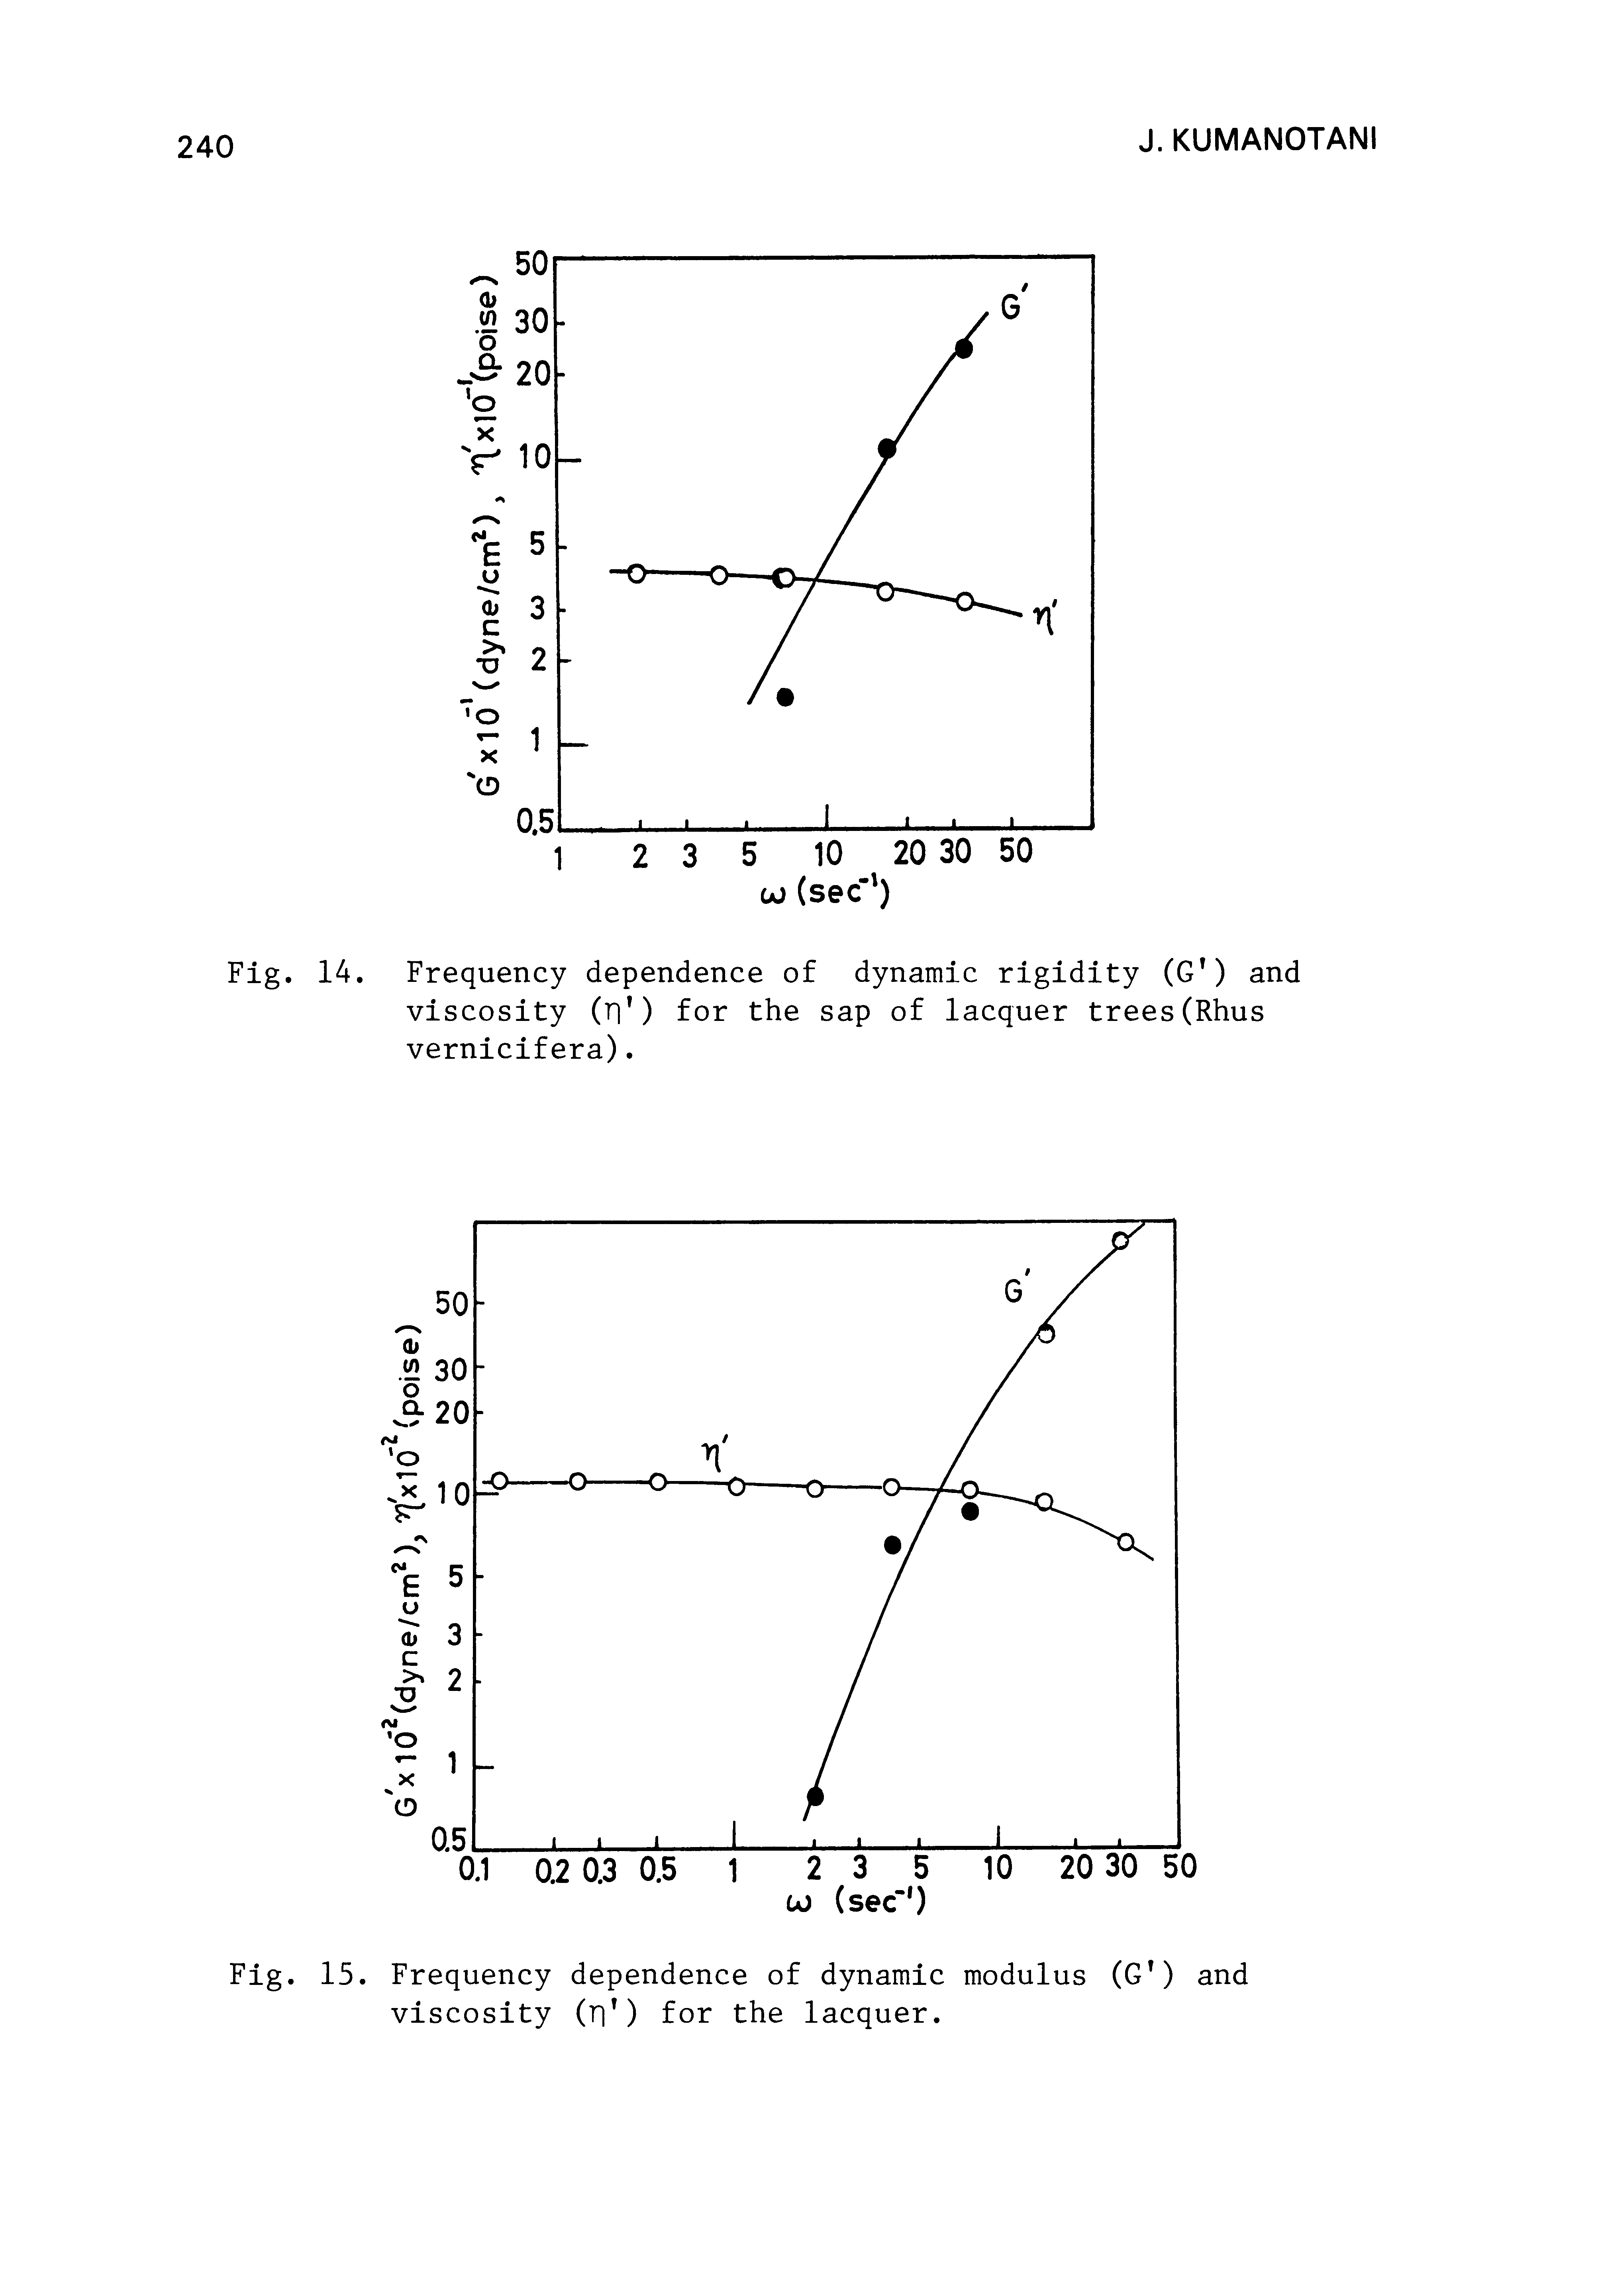 Fig. 15. Frequency dependence of dynamic modulus (G ) and viscosity (t ) for the lacquer.